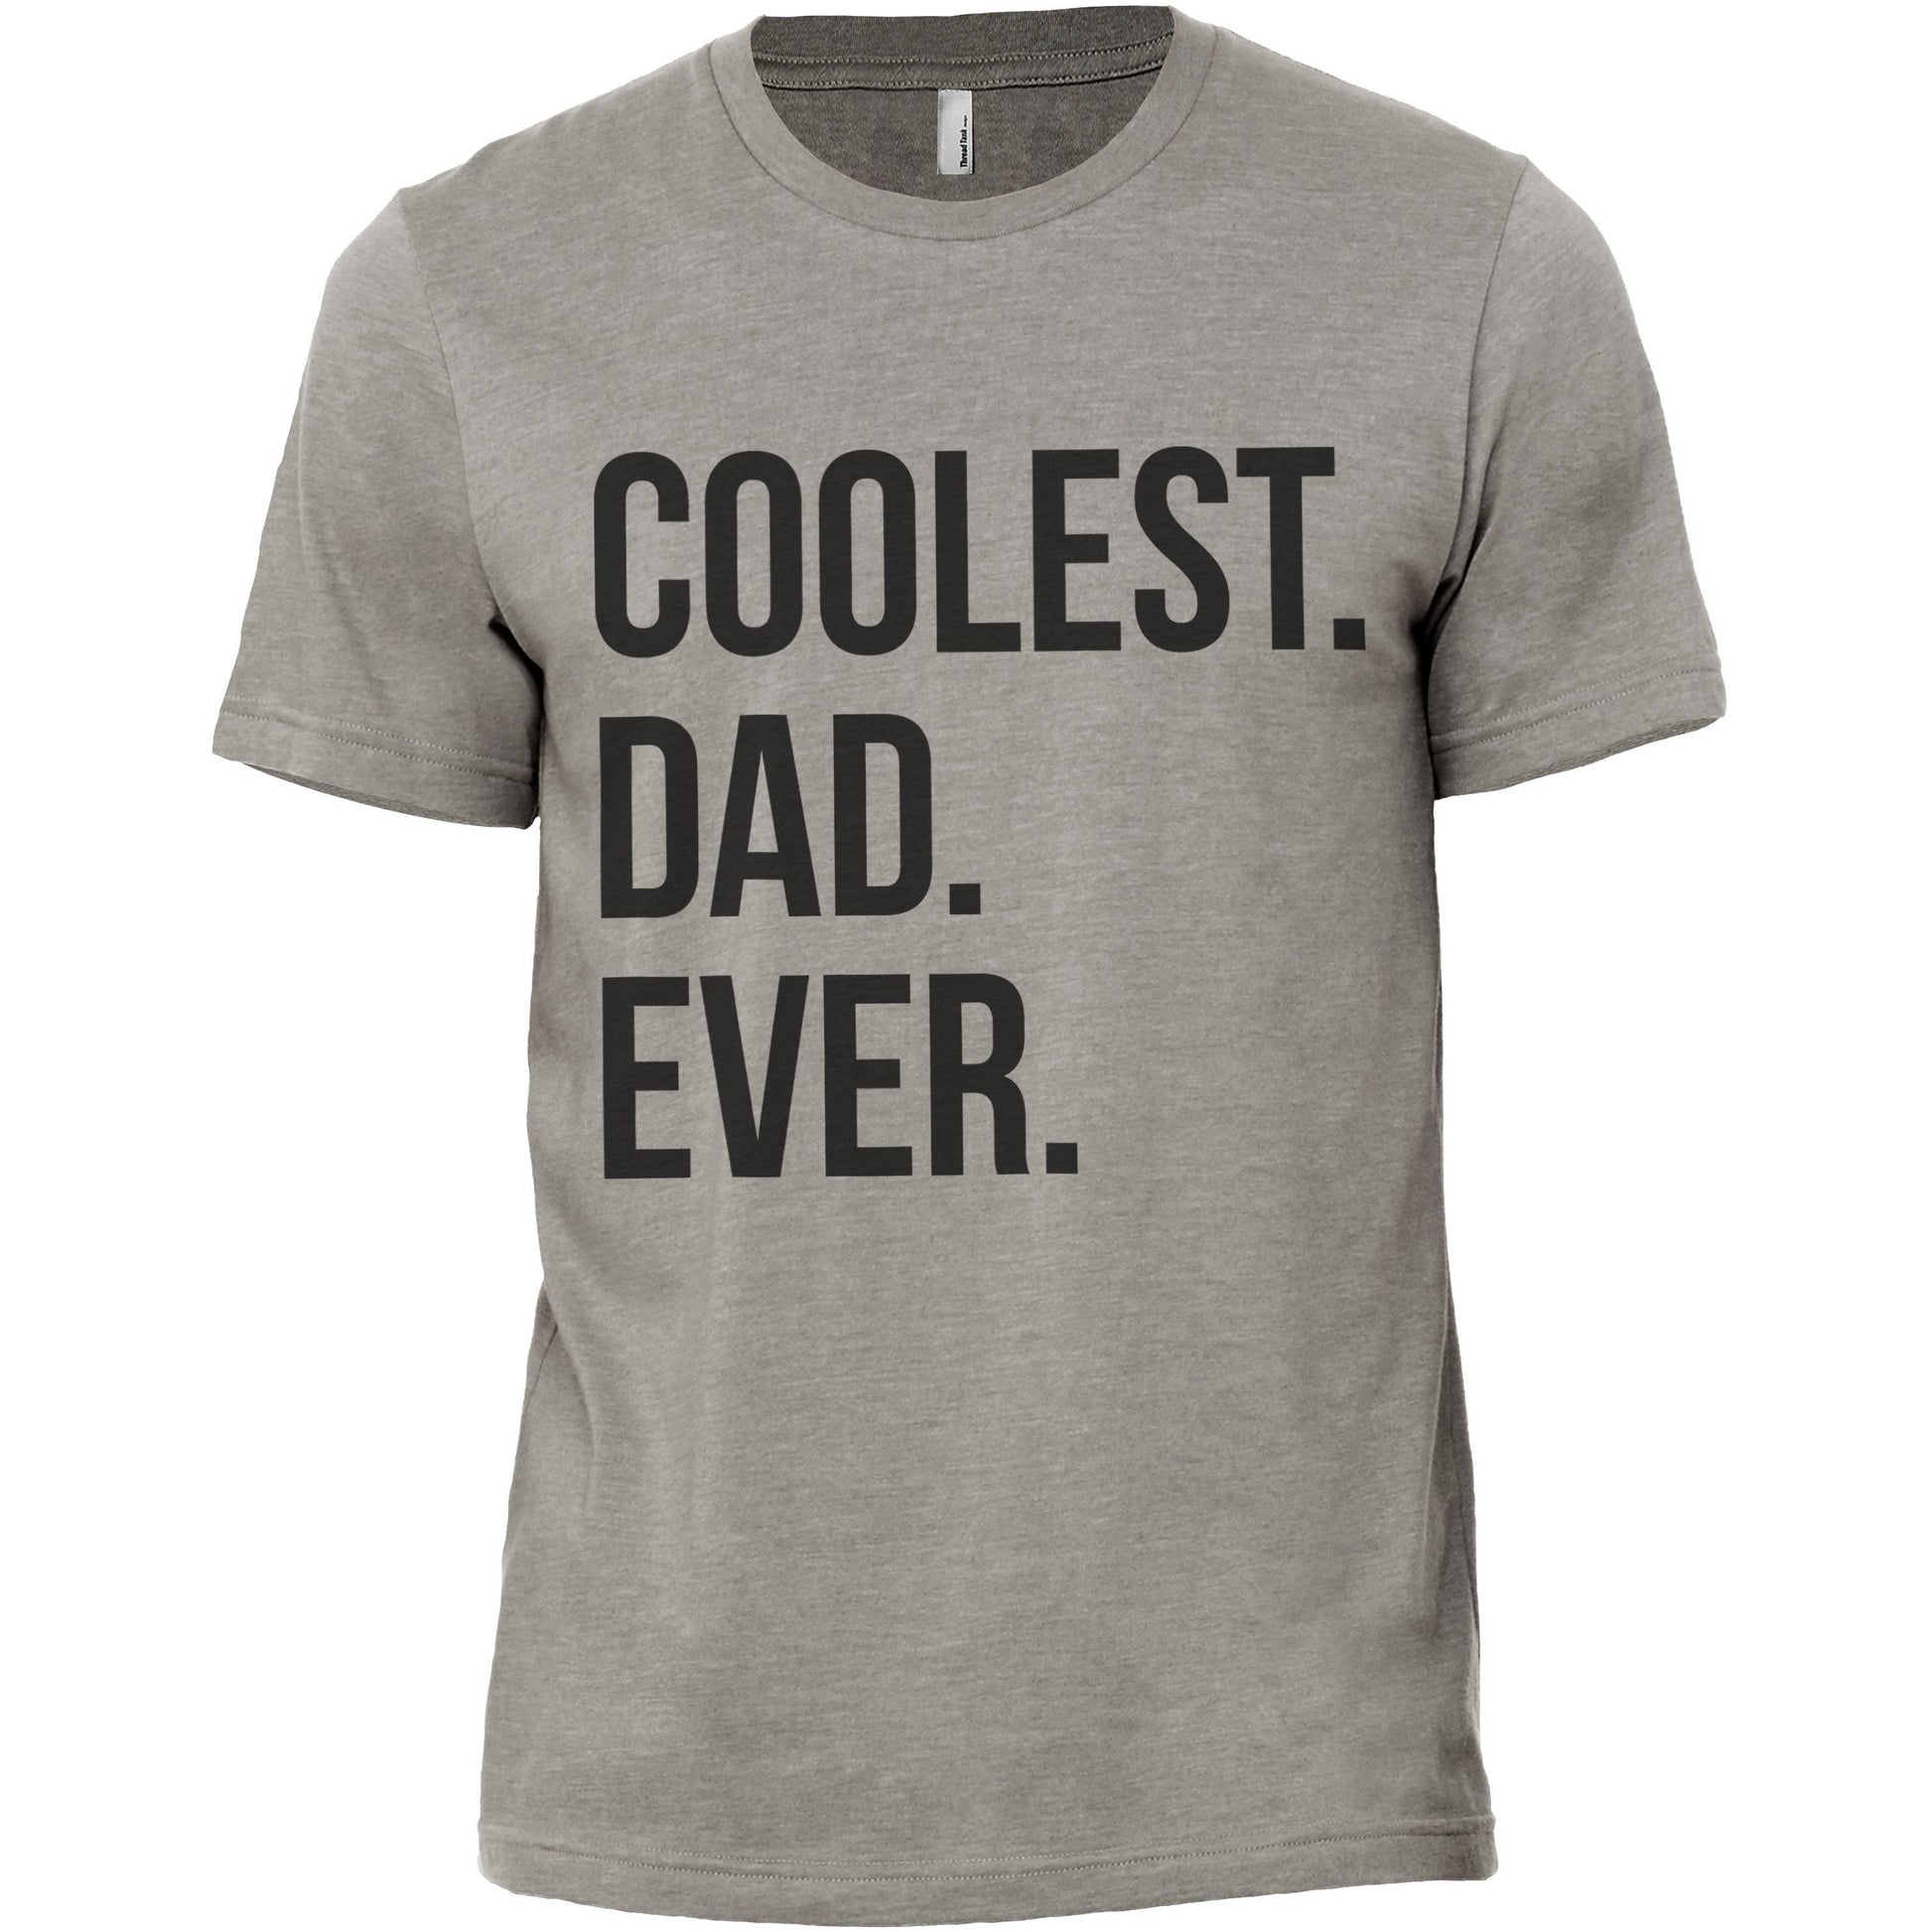 Coolest Dad Ever Military Grey Printed Graphic Men's Crew T-Shirt Tee